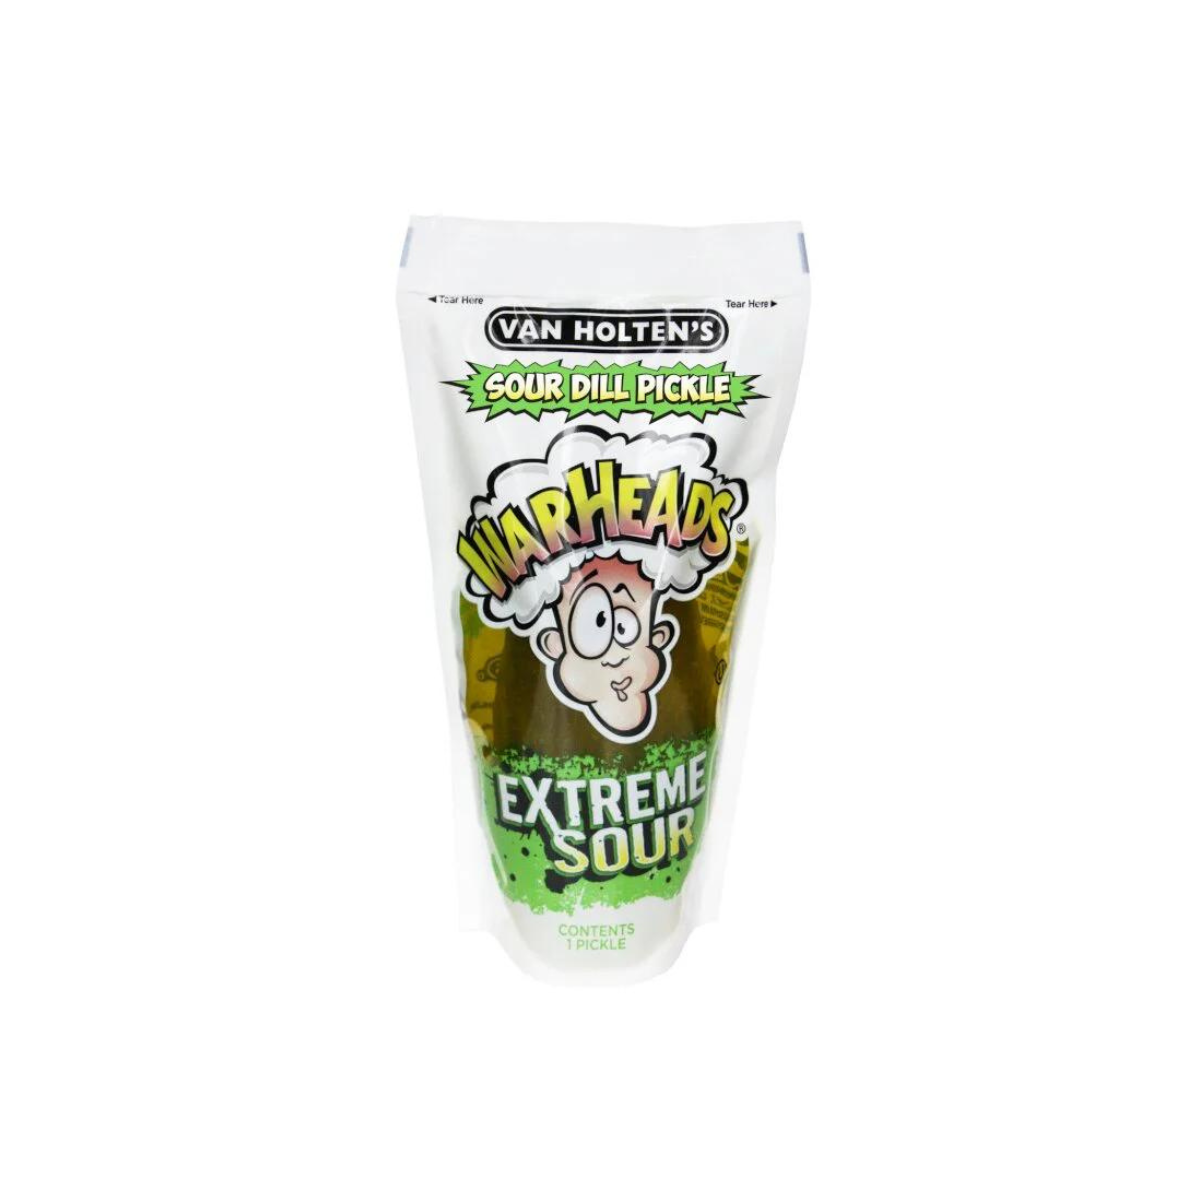 Van Holten's Warheads Extreme Sour Pickle Jumbo